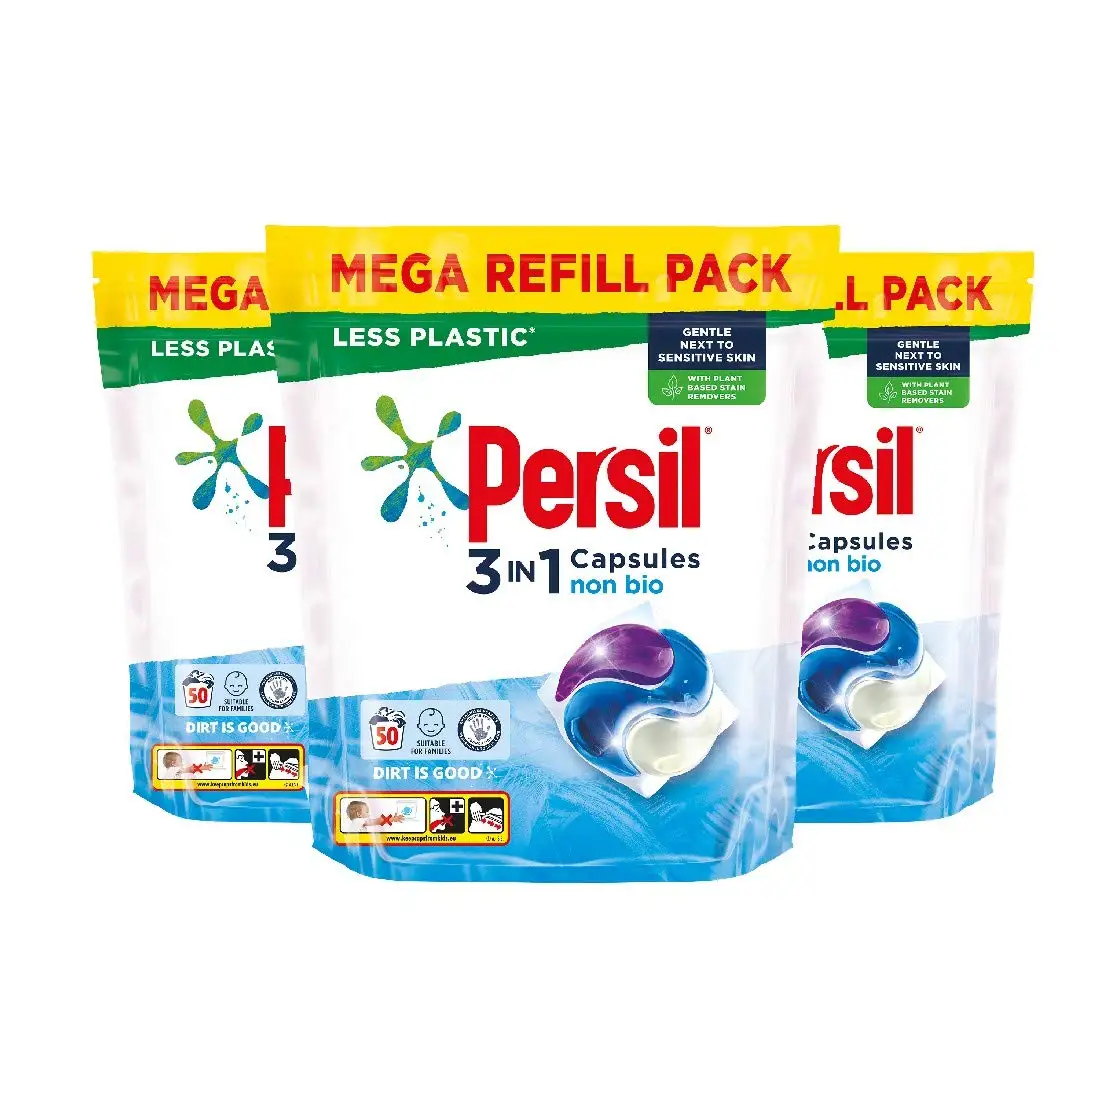 Hot Selling Persil Washing Powder For laundry And Cleaning In Stock